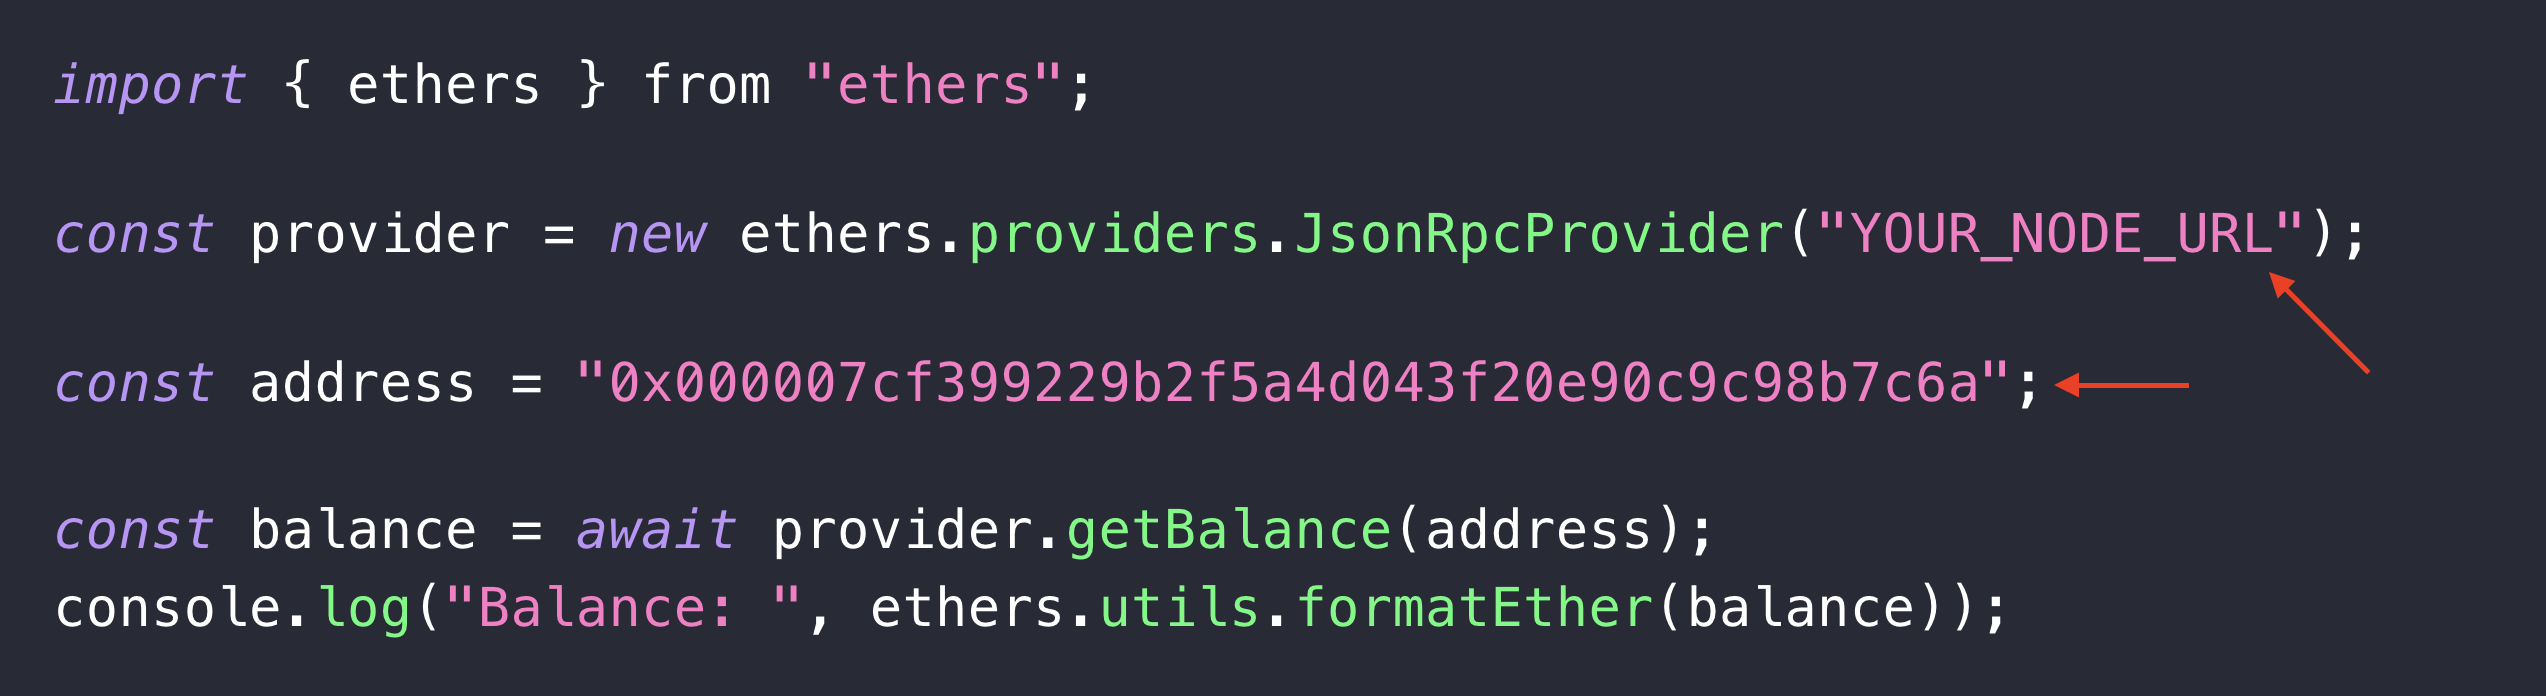 Red arrows pointing at "provider" and "address" variables in code editor.